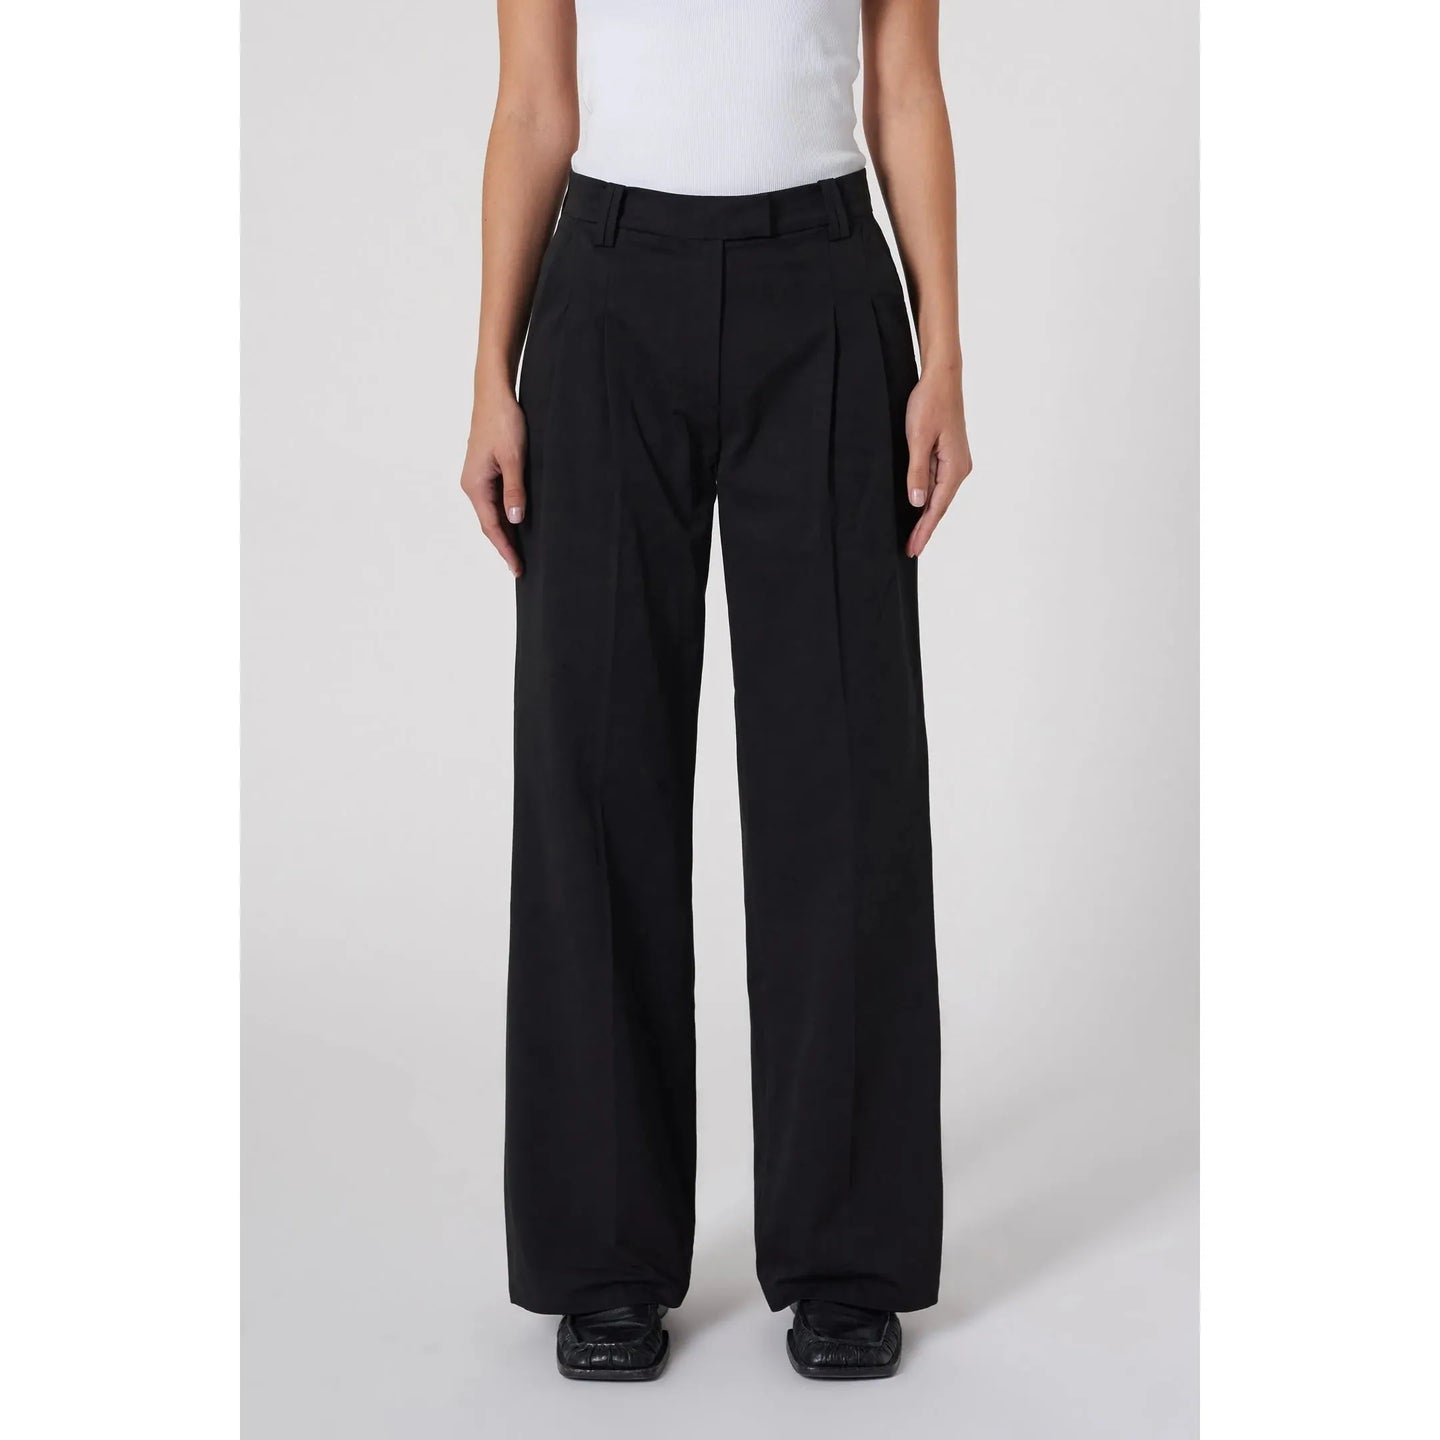 Baggy Everyday Pants by Ceres Life Online, THE ICONIC